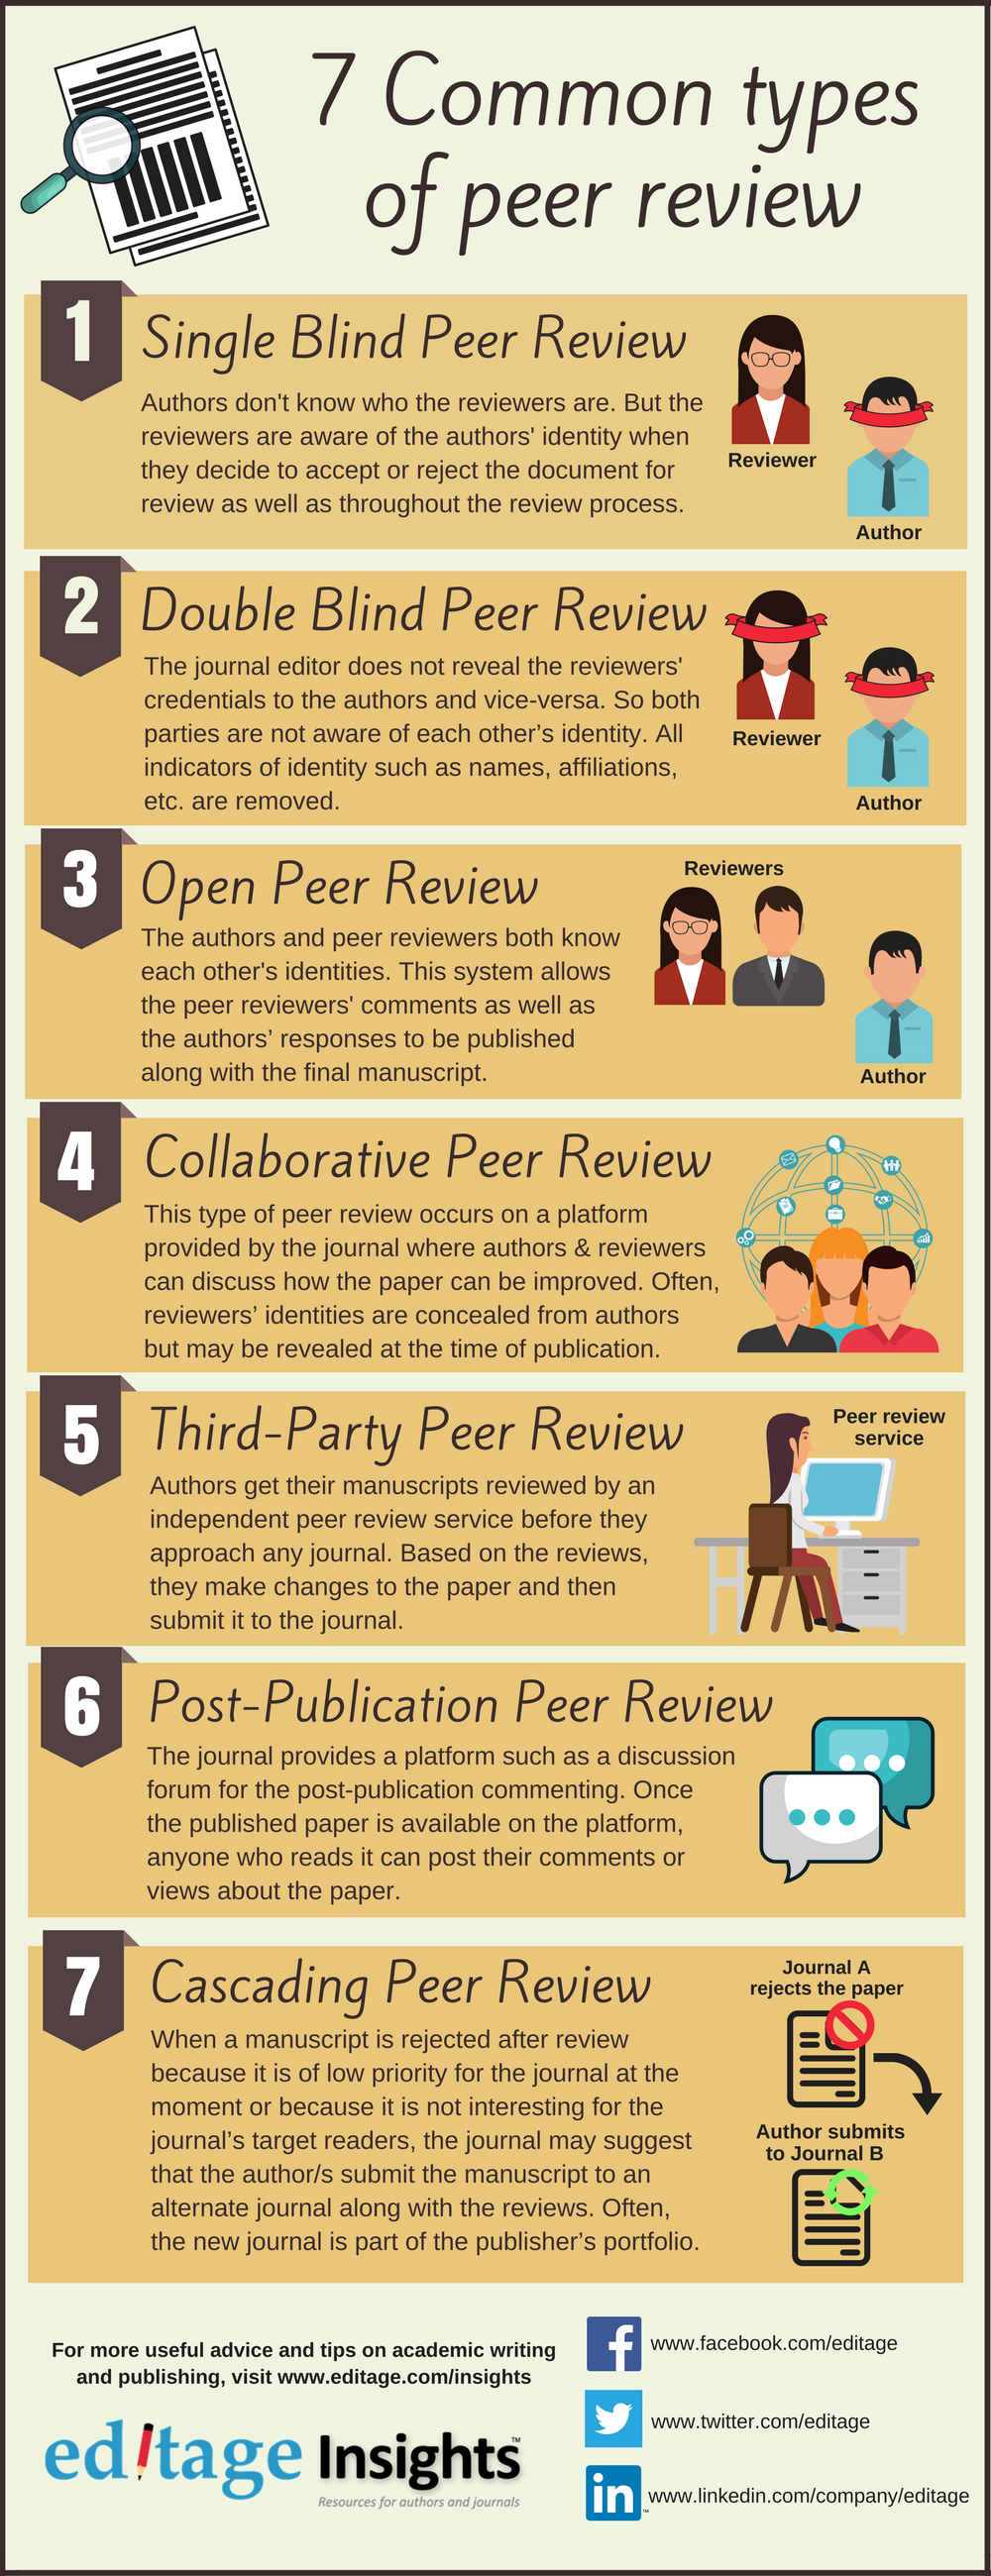 7 Common types of peer review